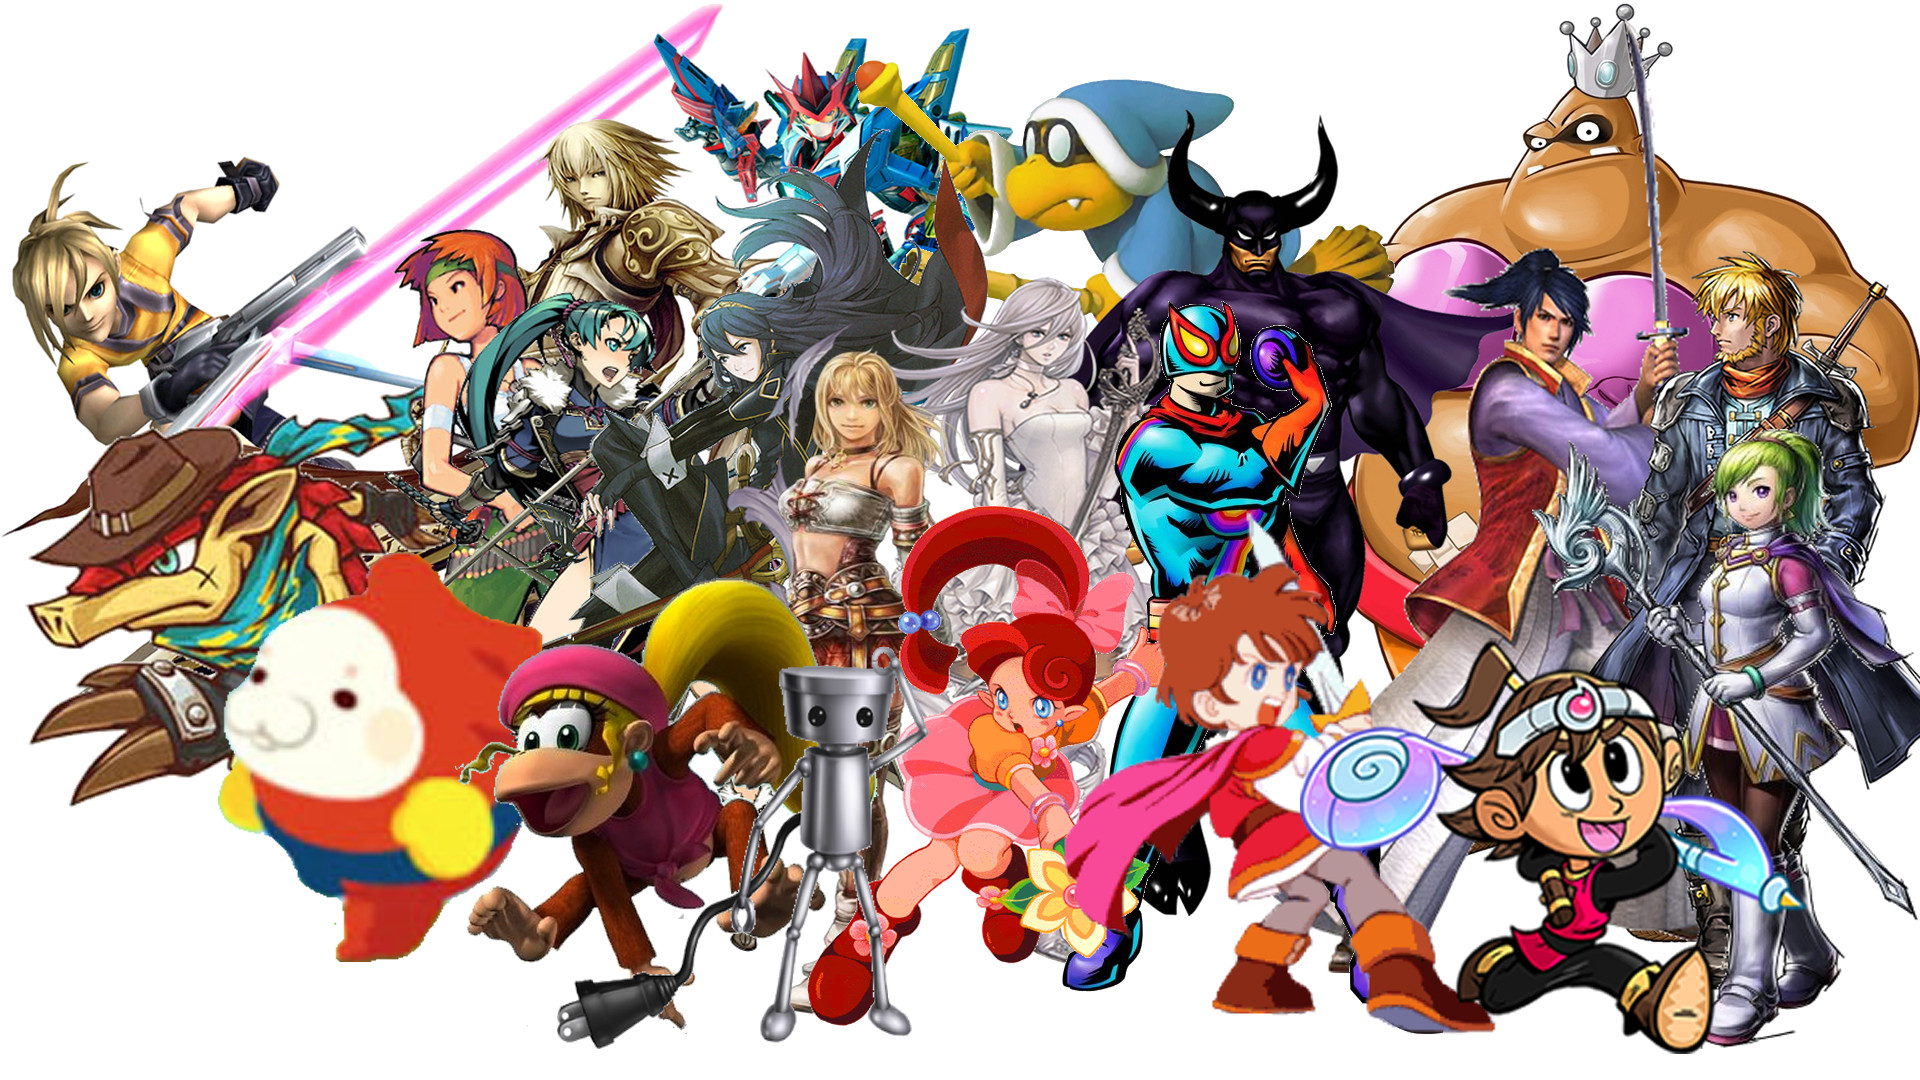 1920x1080 Super Smash Bros. for Nintendo 3DS and Wii U HD Wallpaper | Hintergrund |   | ID:549790 - Wallpaper Abyss